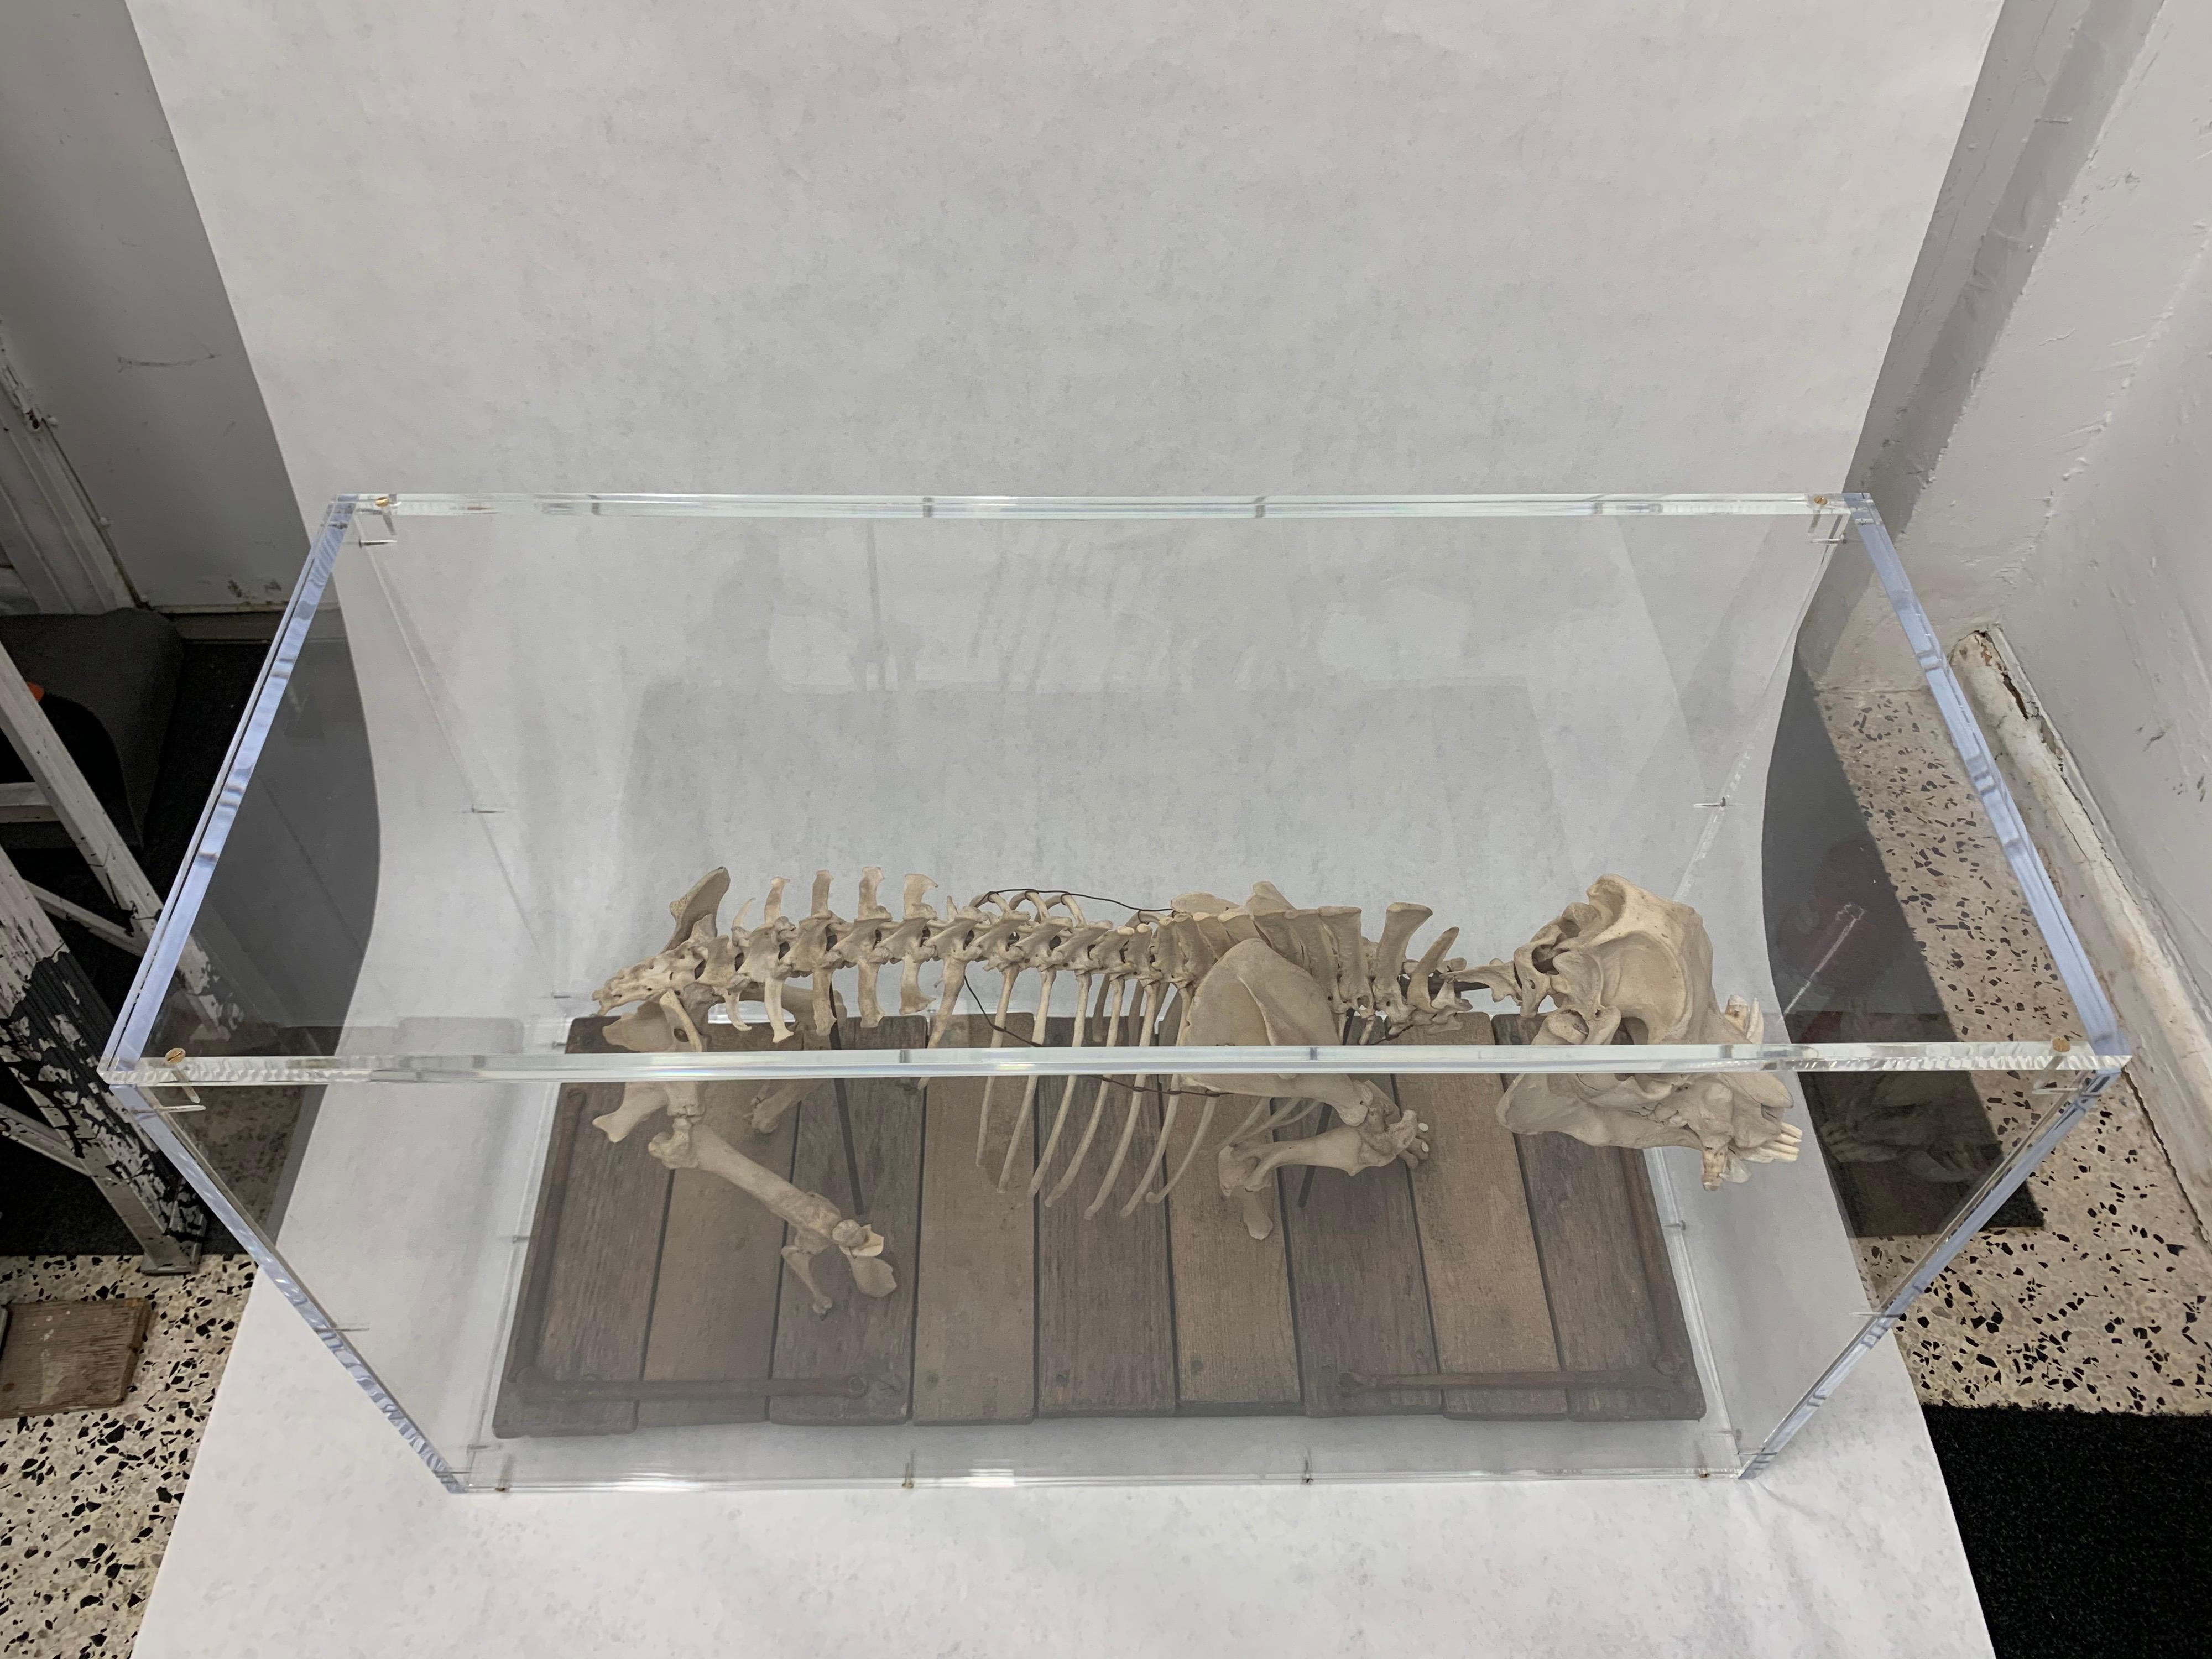 As found, this antique animal sculpture mounted on its original slatted wood base with oxidized metal accents, has been encased in this amazing acrylic display box. It is heavy and important.